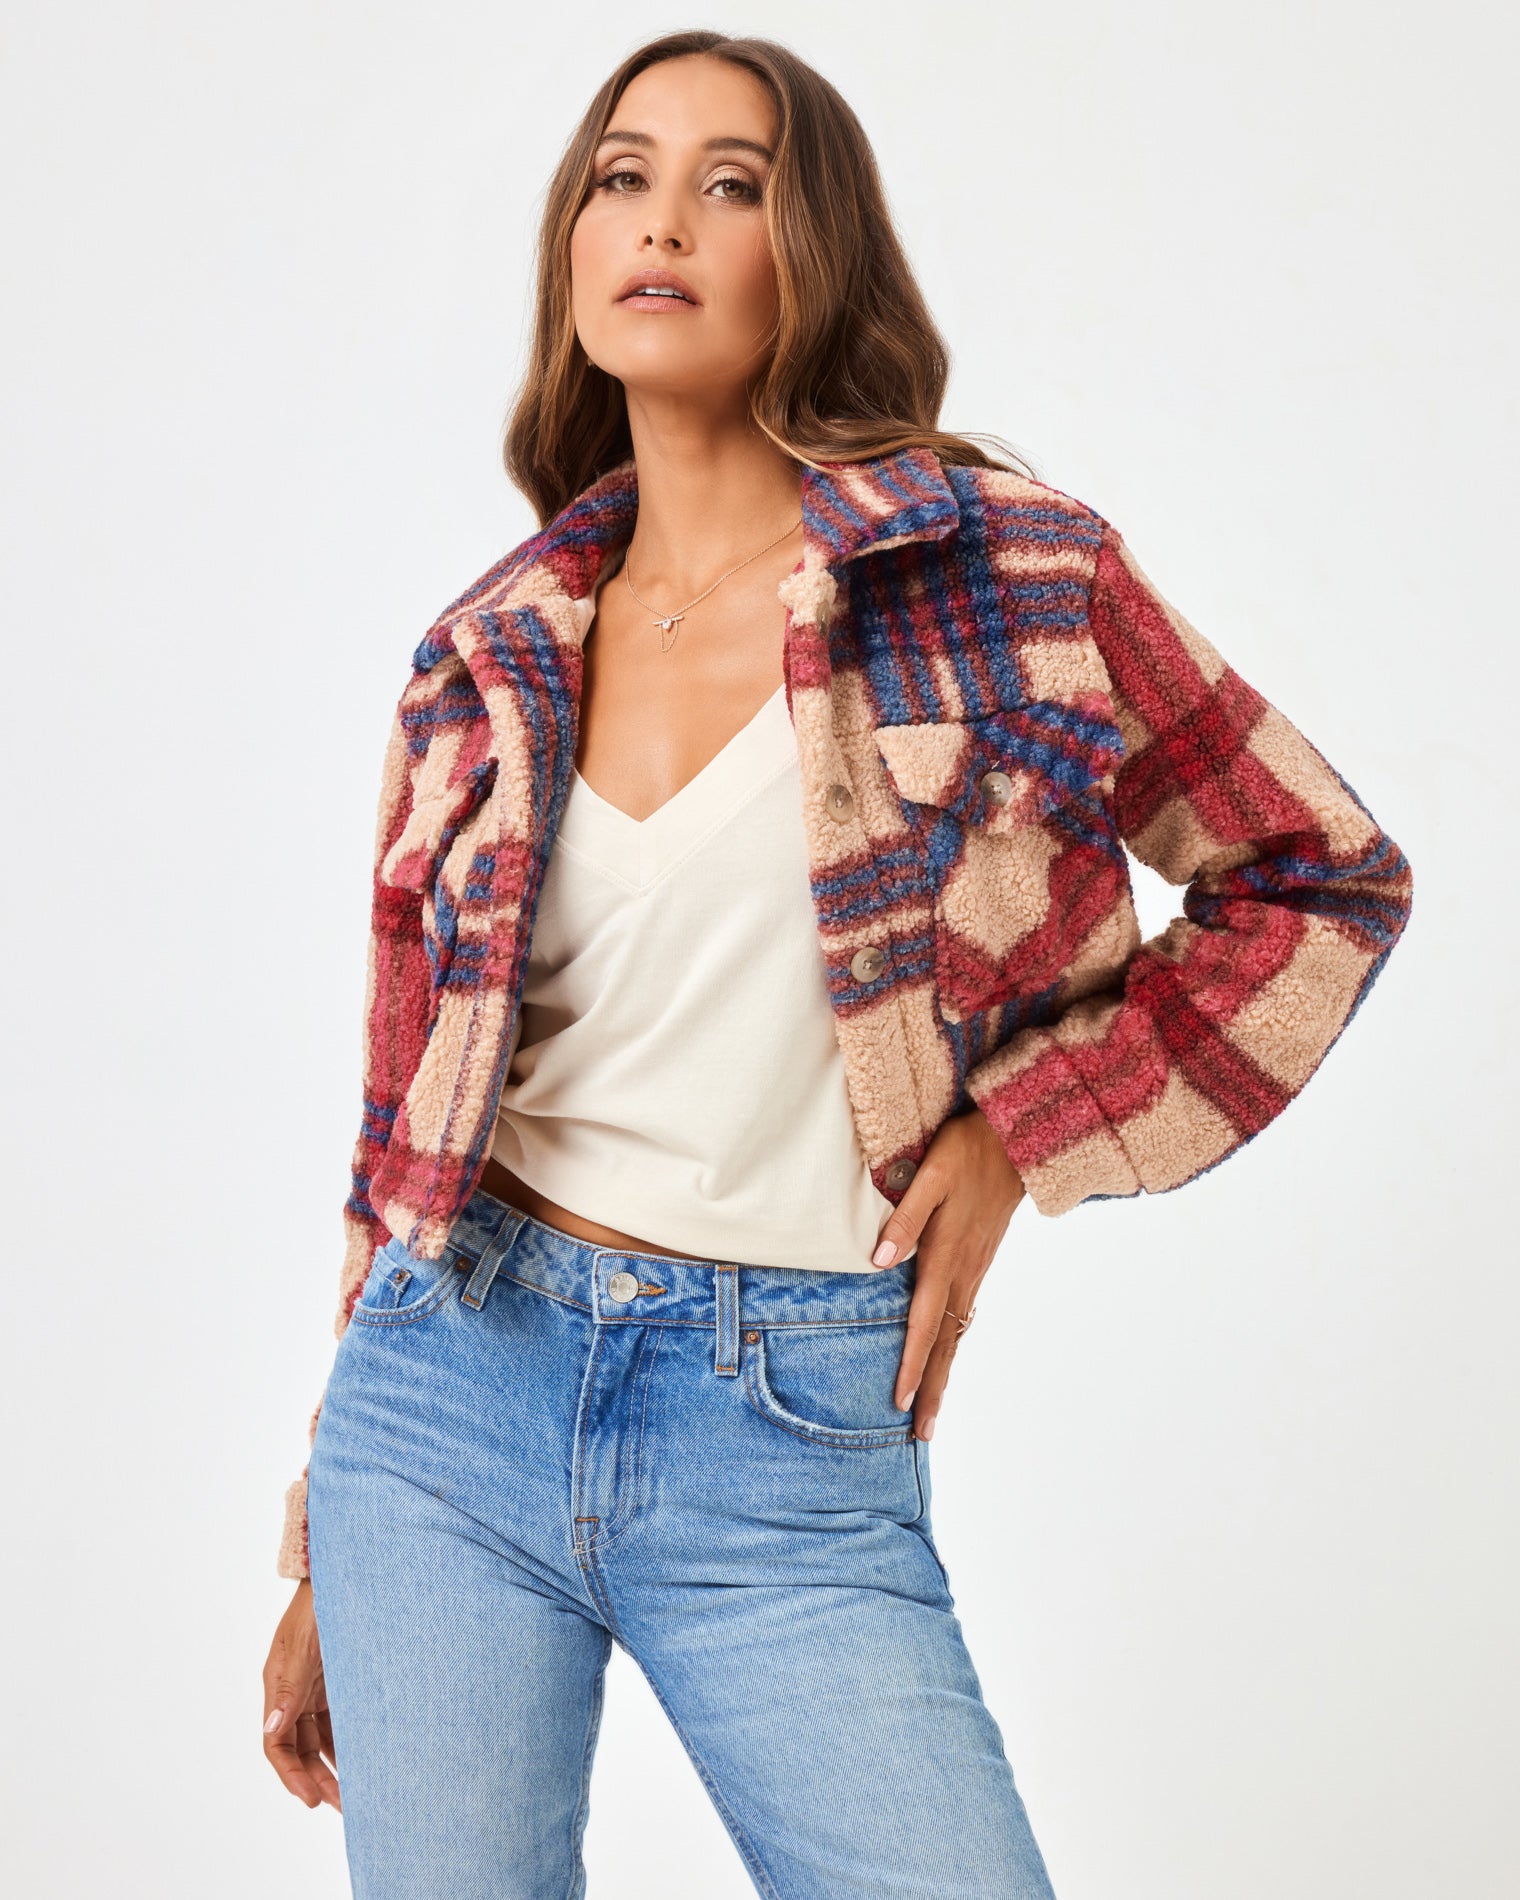 Big Sur Jacket - Big Sur Plaid Big Sur Plaid | Model: Anna (size: S) | Hover